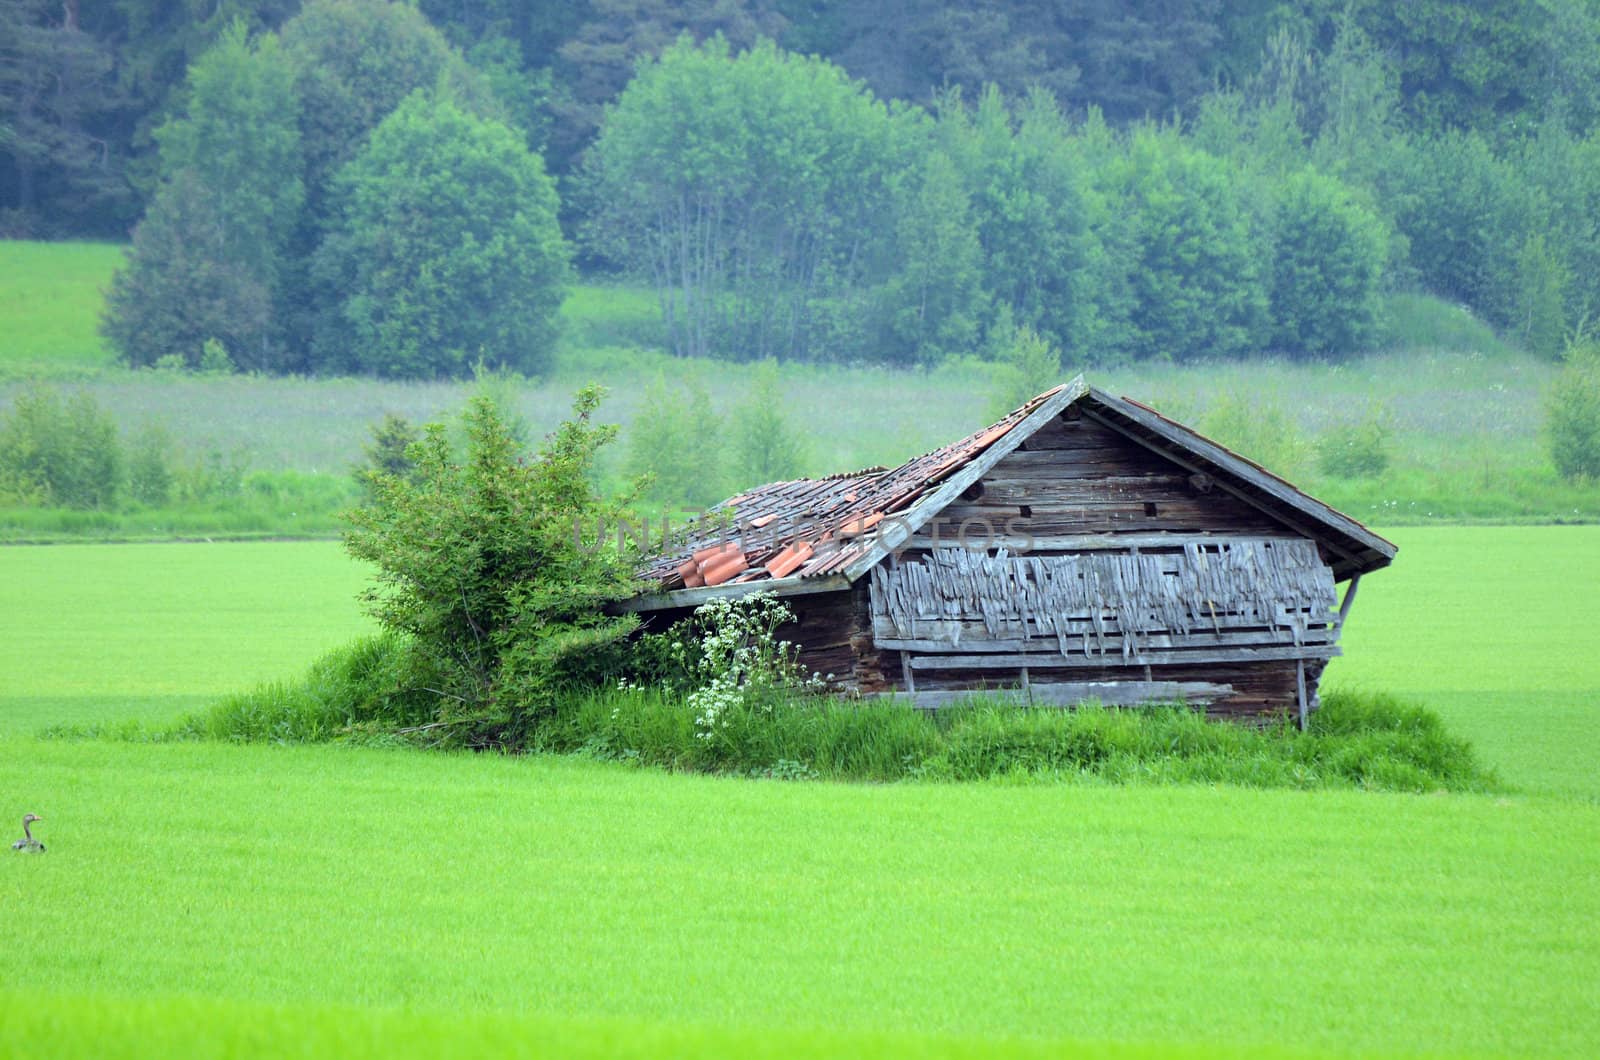 An old building in the countryside in Sweden